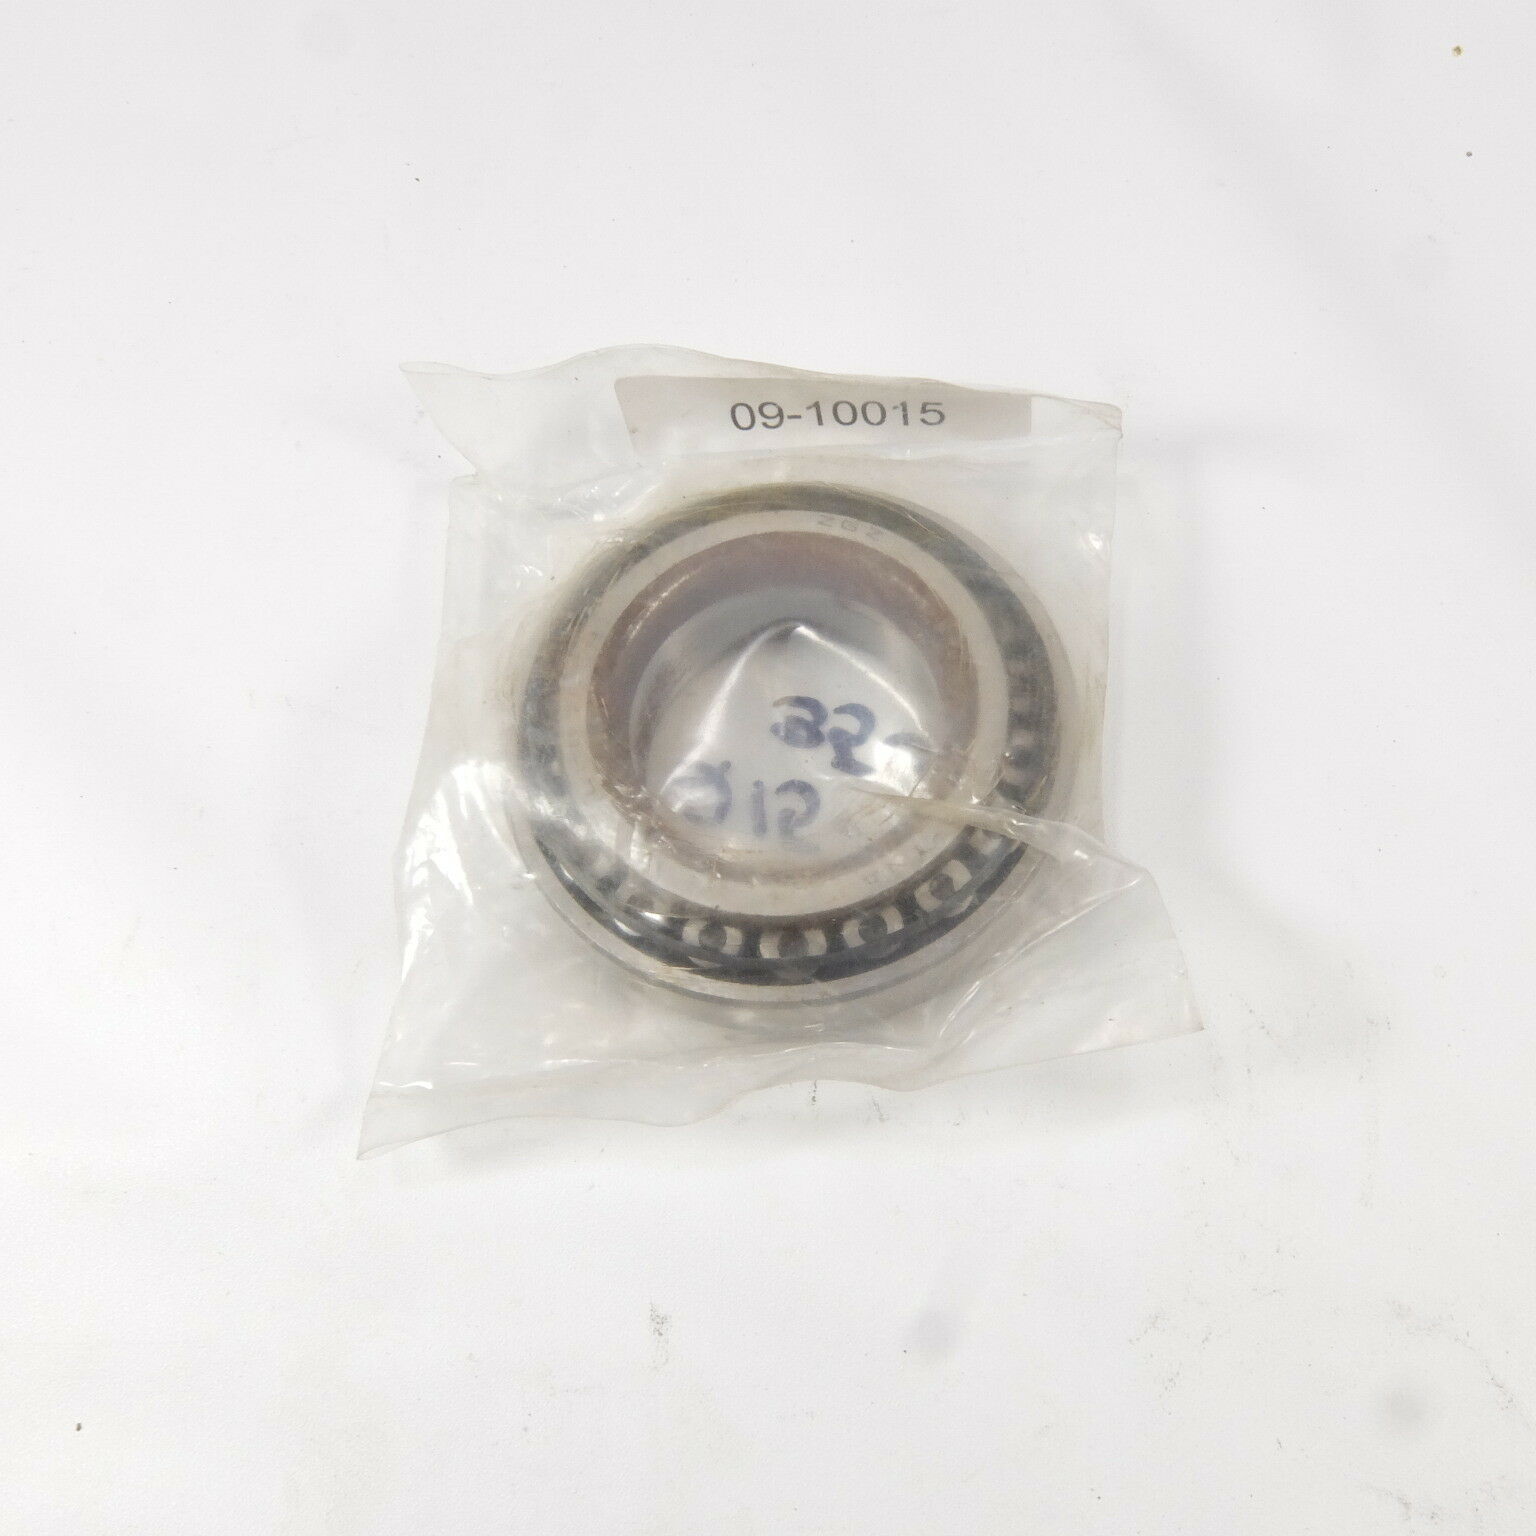 Primary image for ROTARY 09-10015 ROLLER BEARING SET 1-1/4 X 2- 21/64 TROY BUILT GW-11522